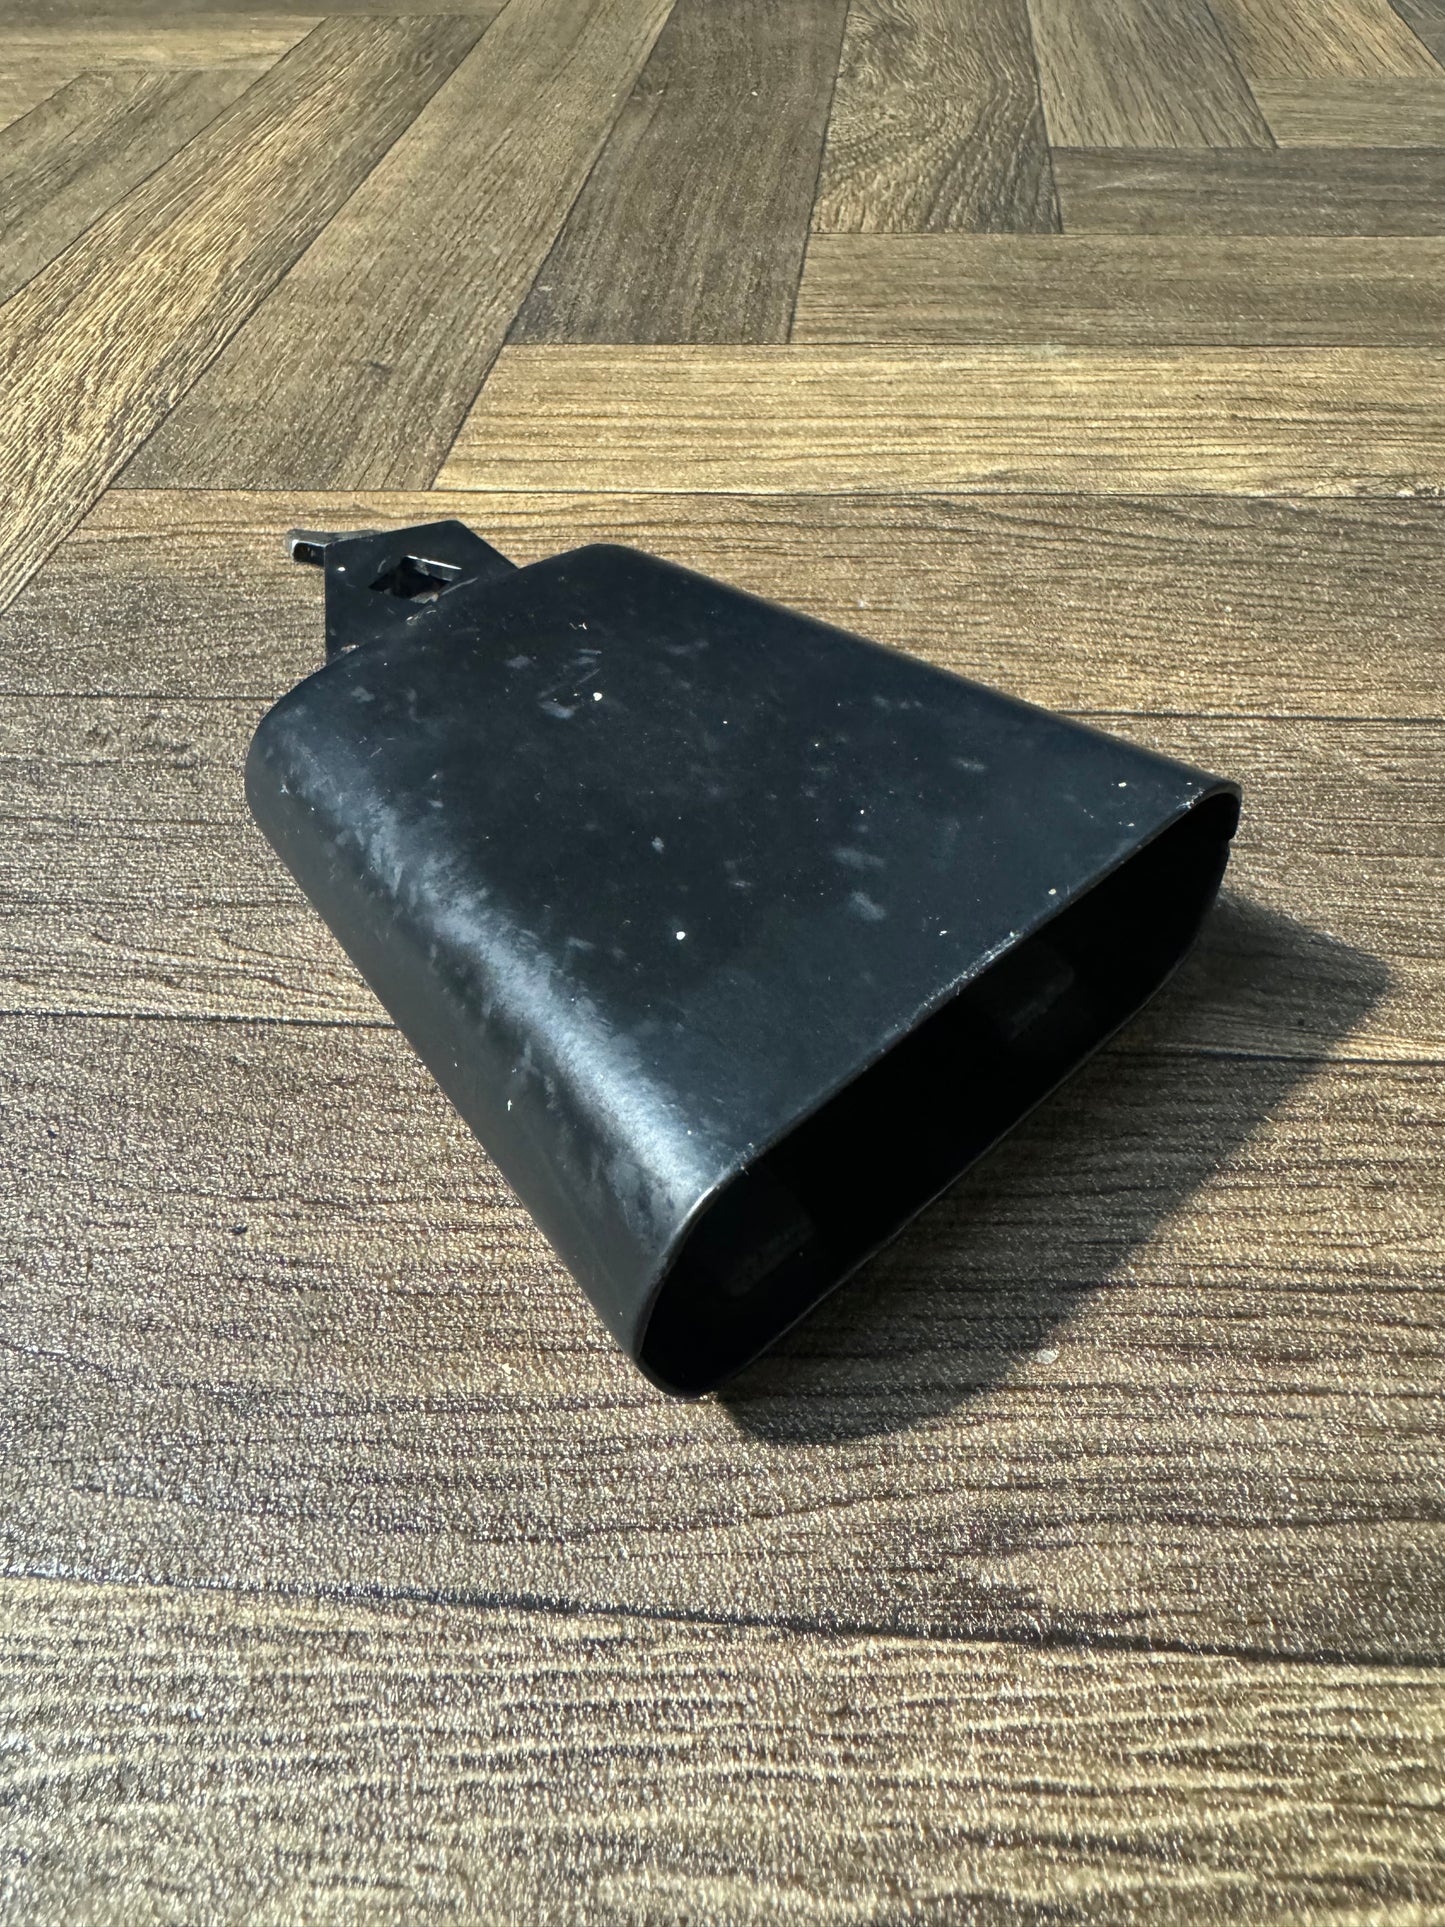 Drum Cowbell 5" Percussion / Drum Hardware / Accessory #LD37